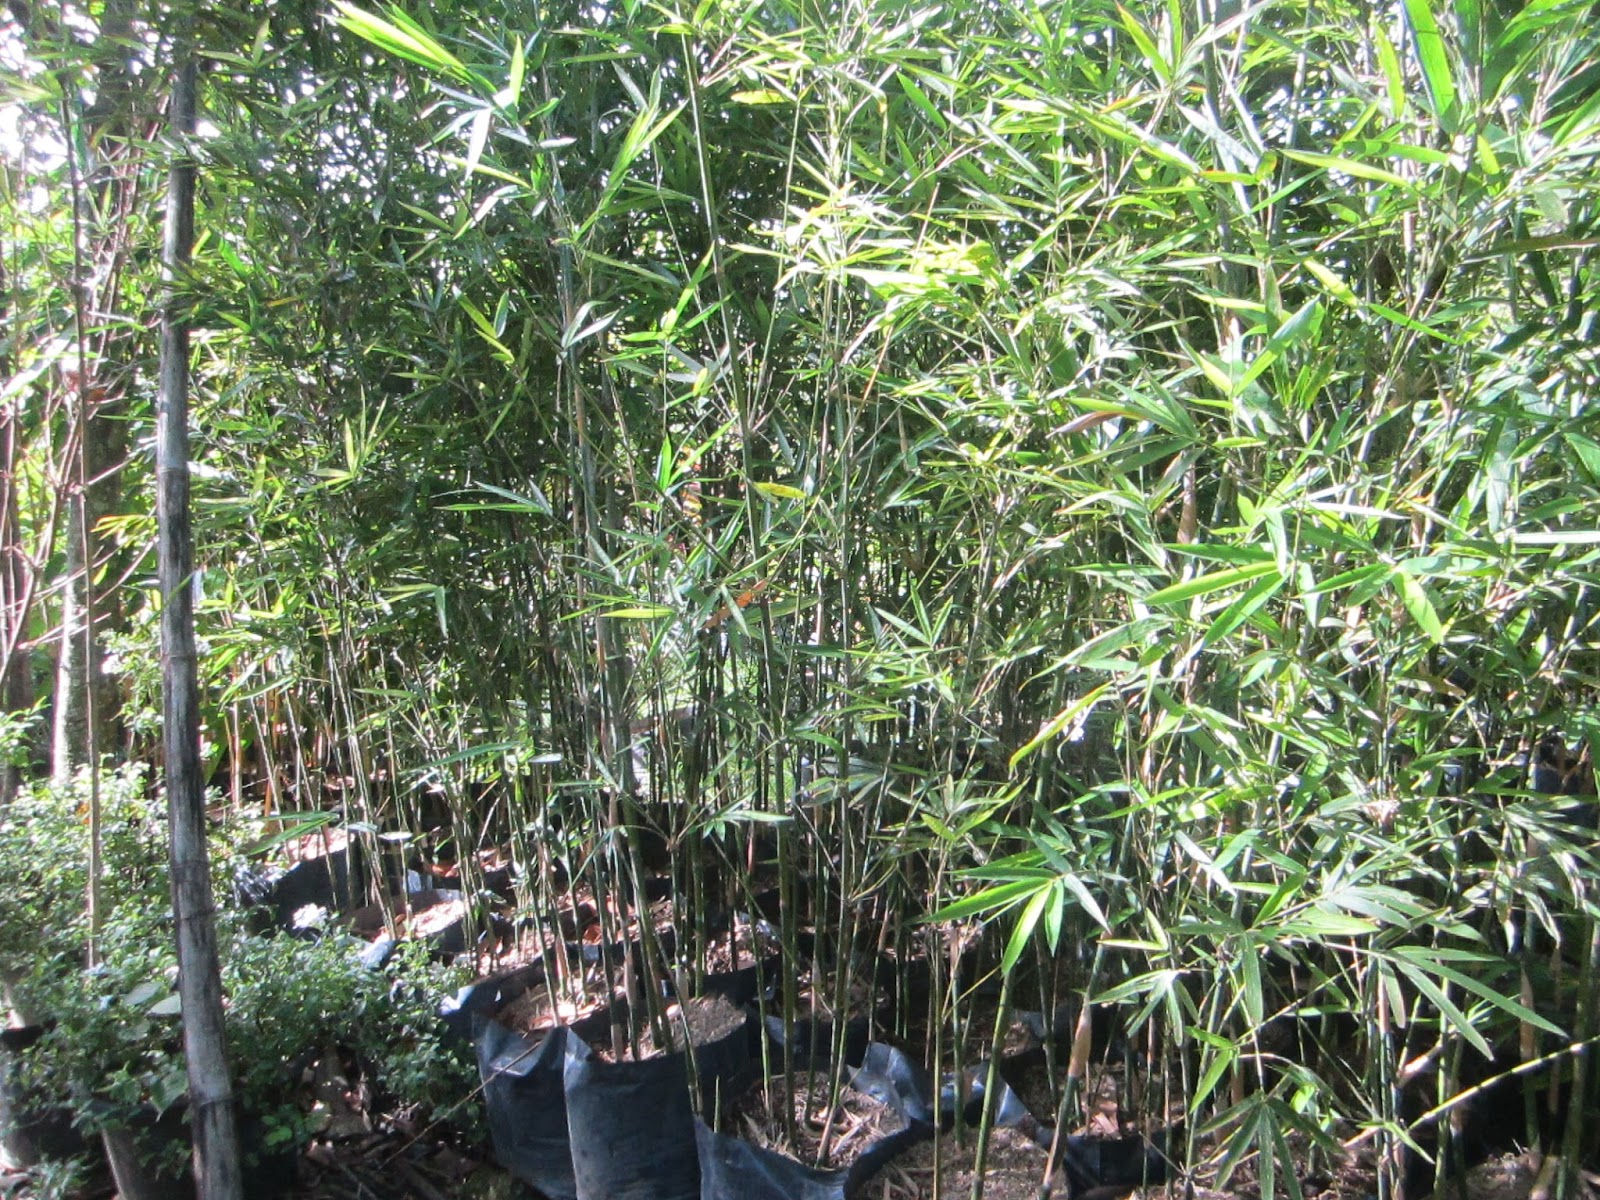 Ornamental Plants For Sale: Bamboo For Sale